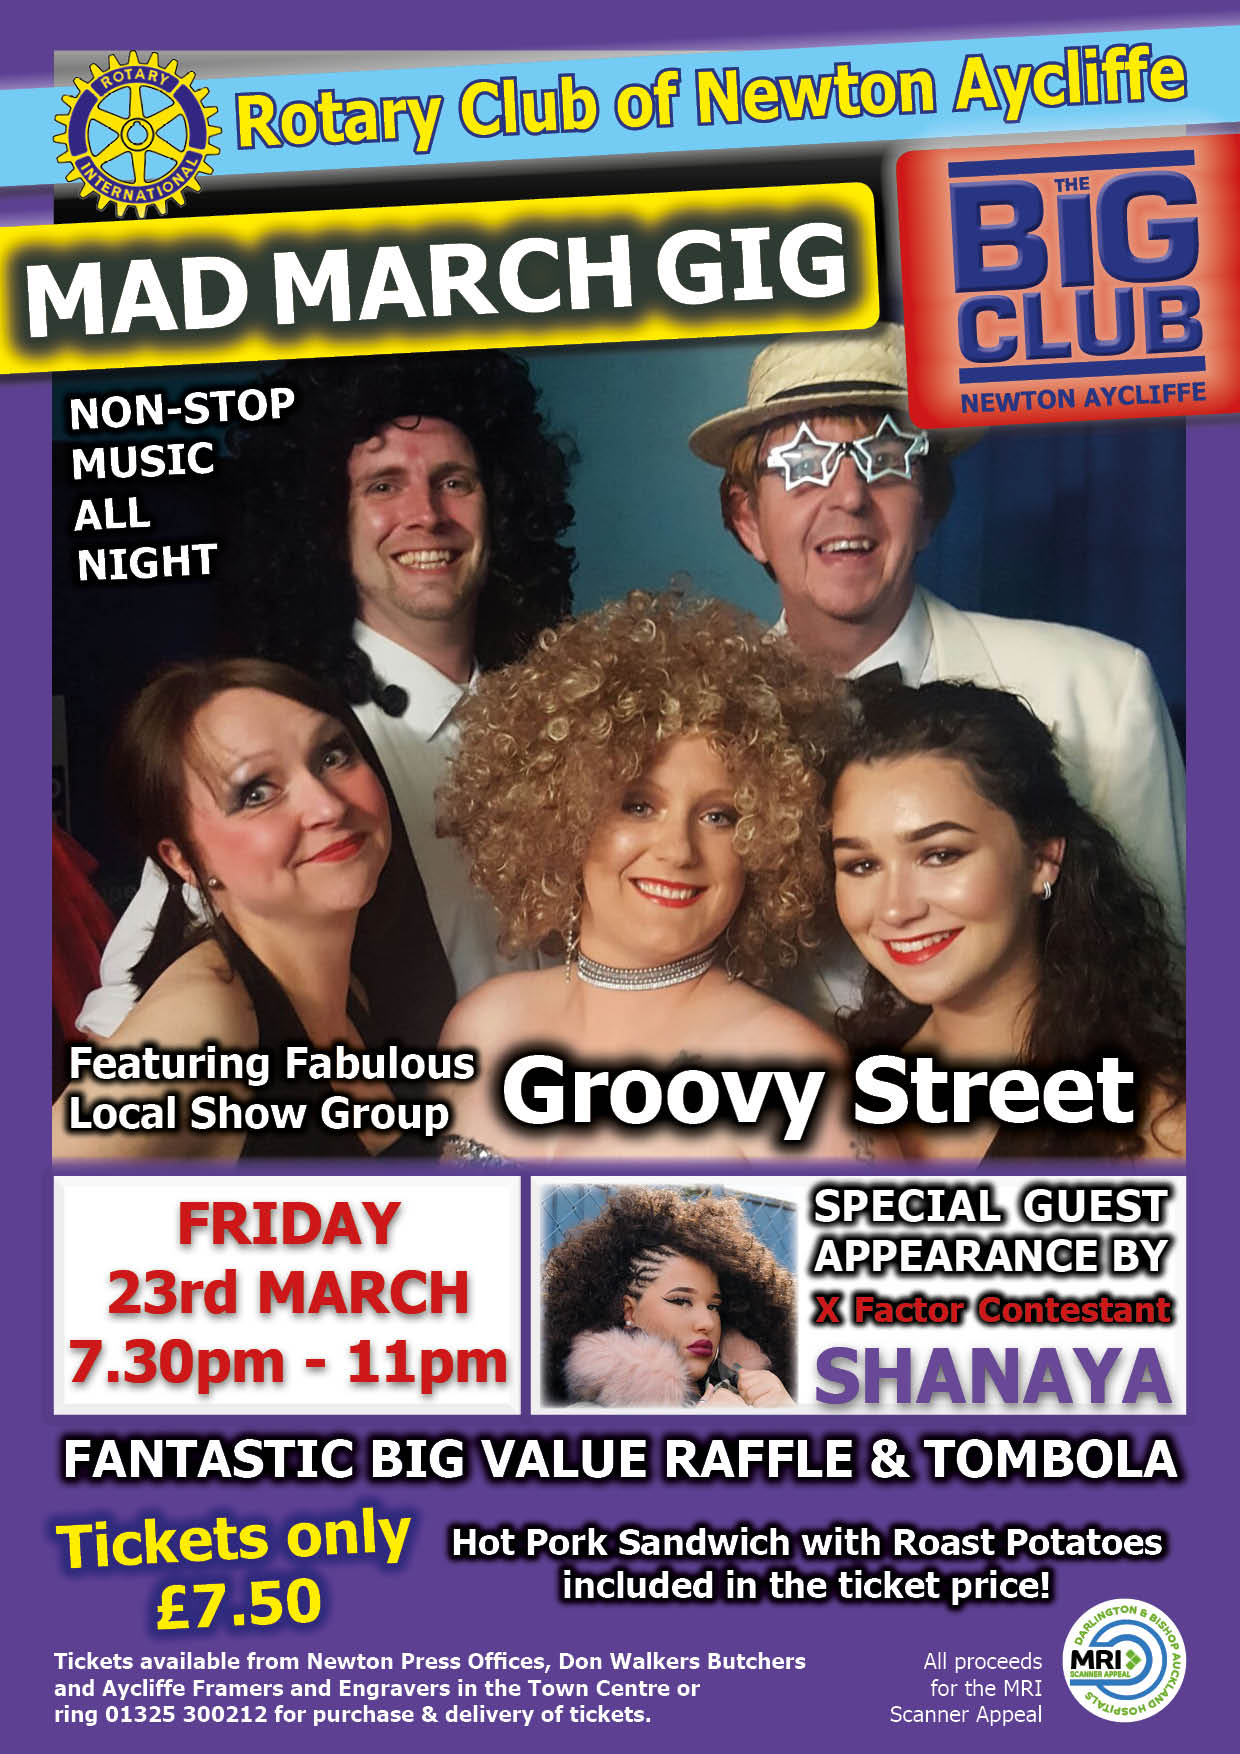 50% of Tickets Sold for Mad March Gig at Big Club